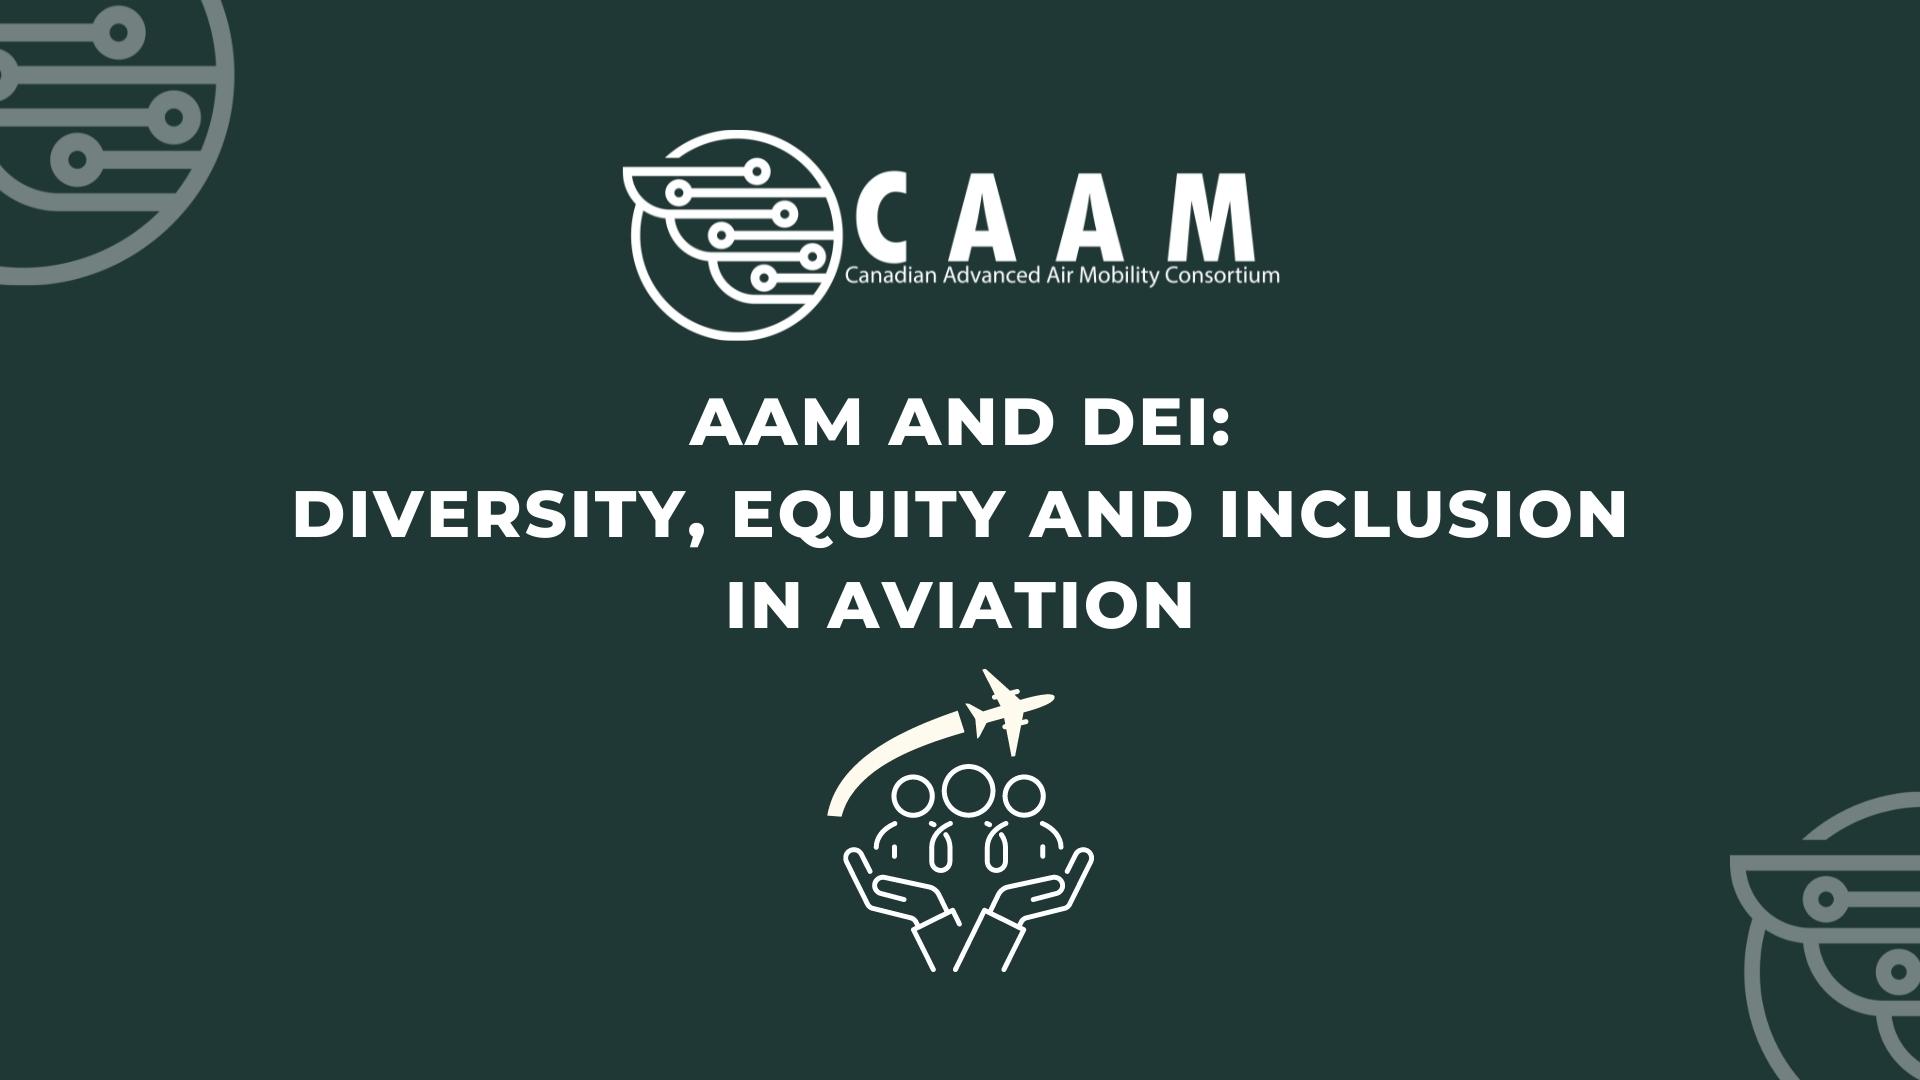 AAM and DEI - Diversity, Equity and Inclusion in Aviation